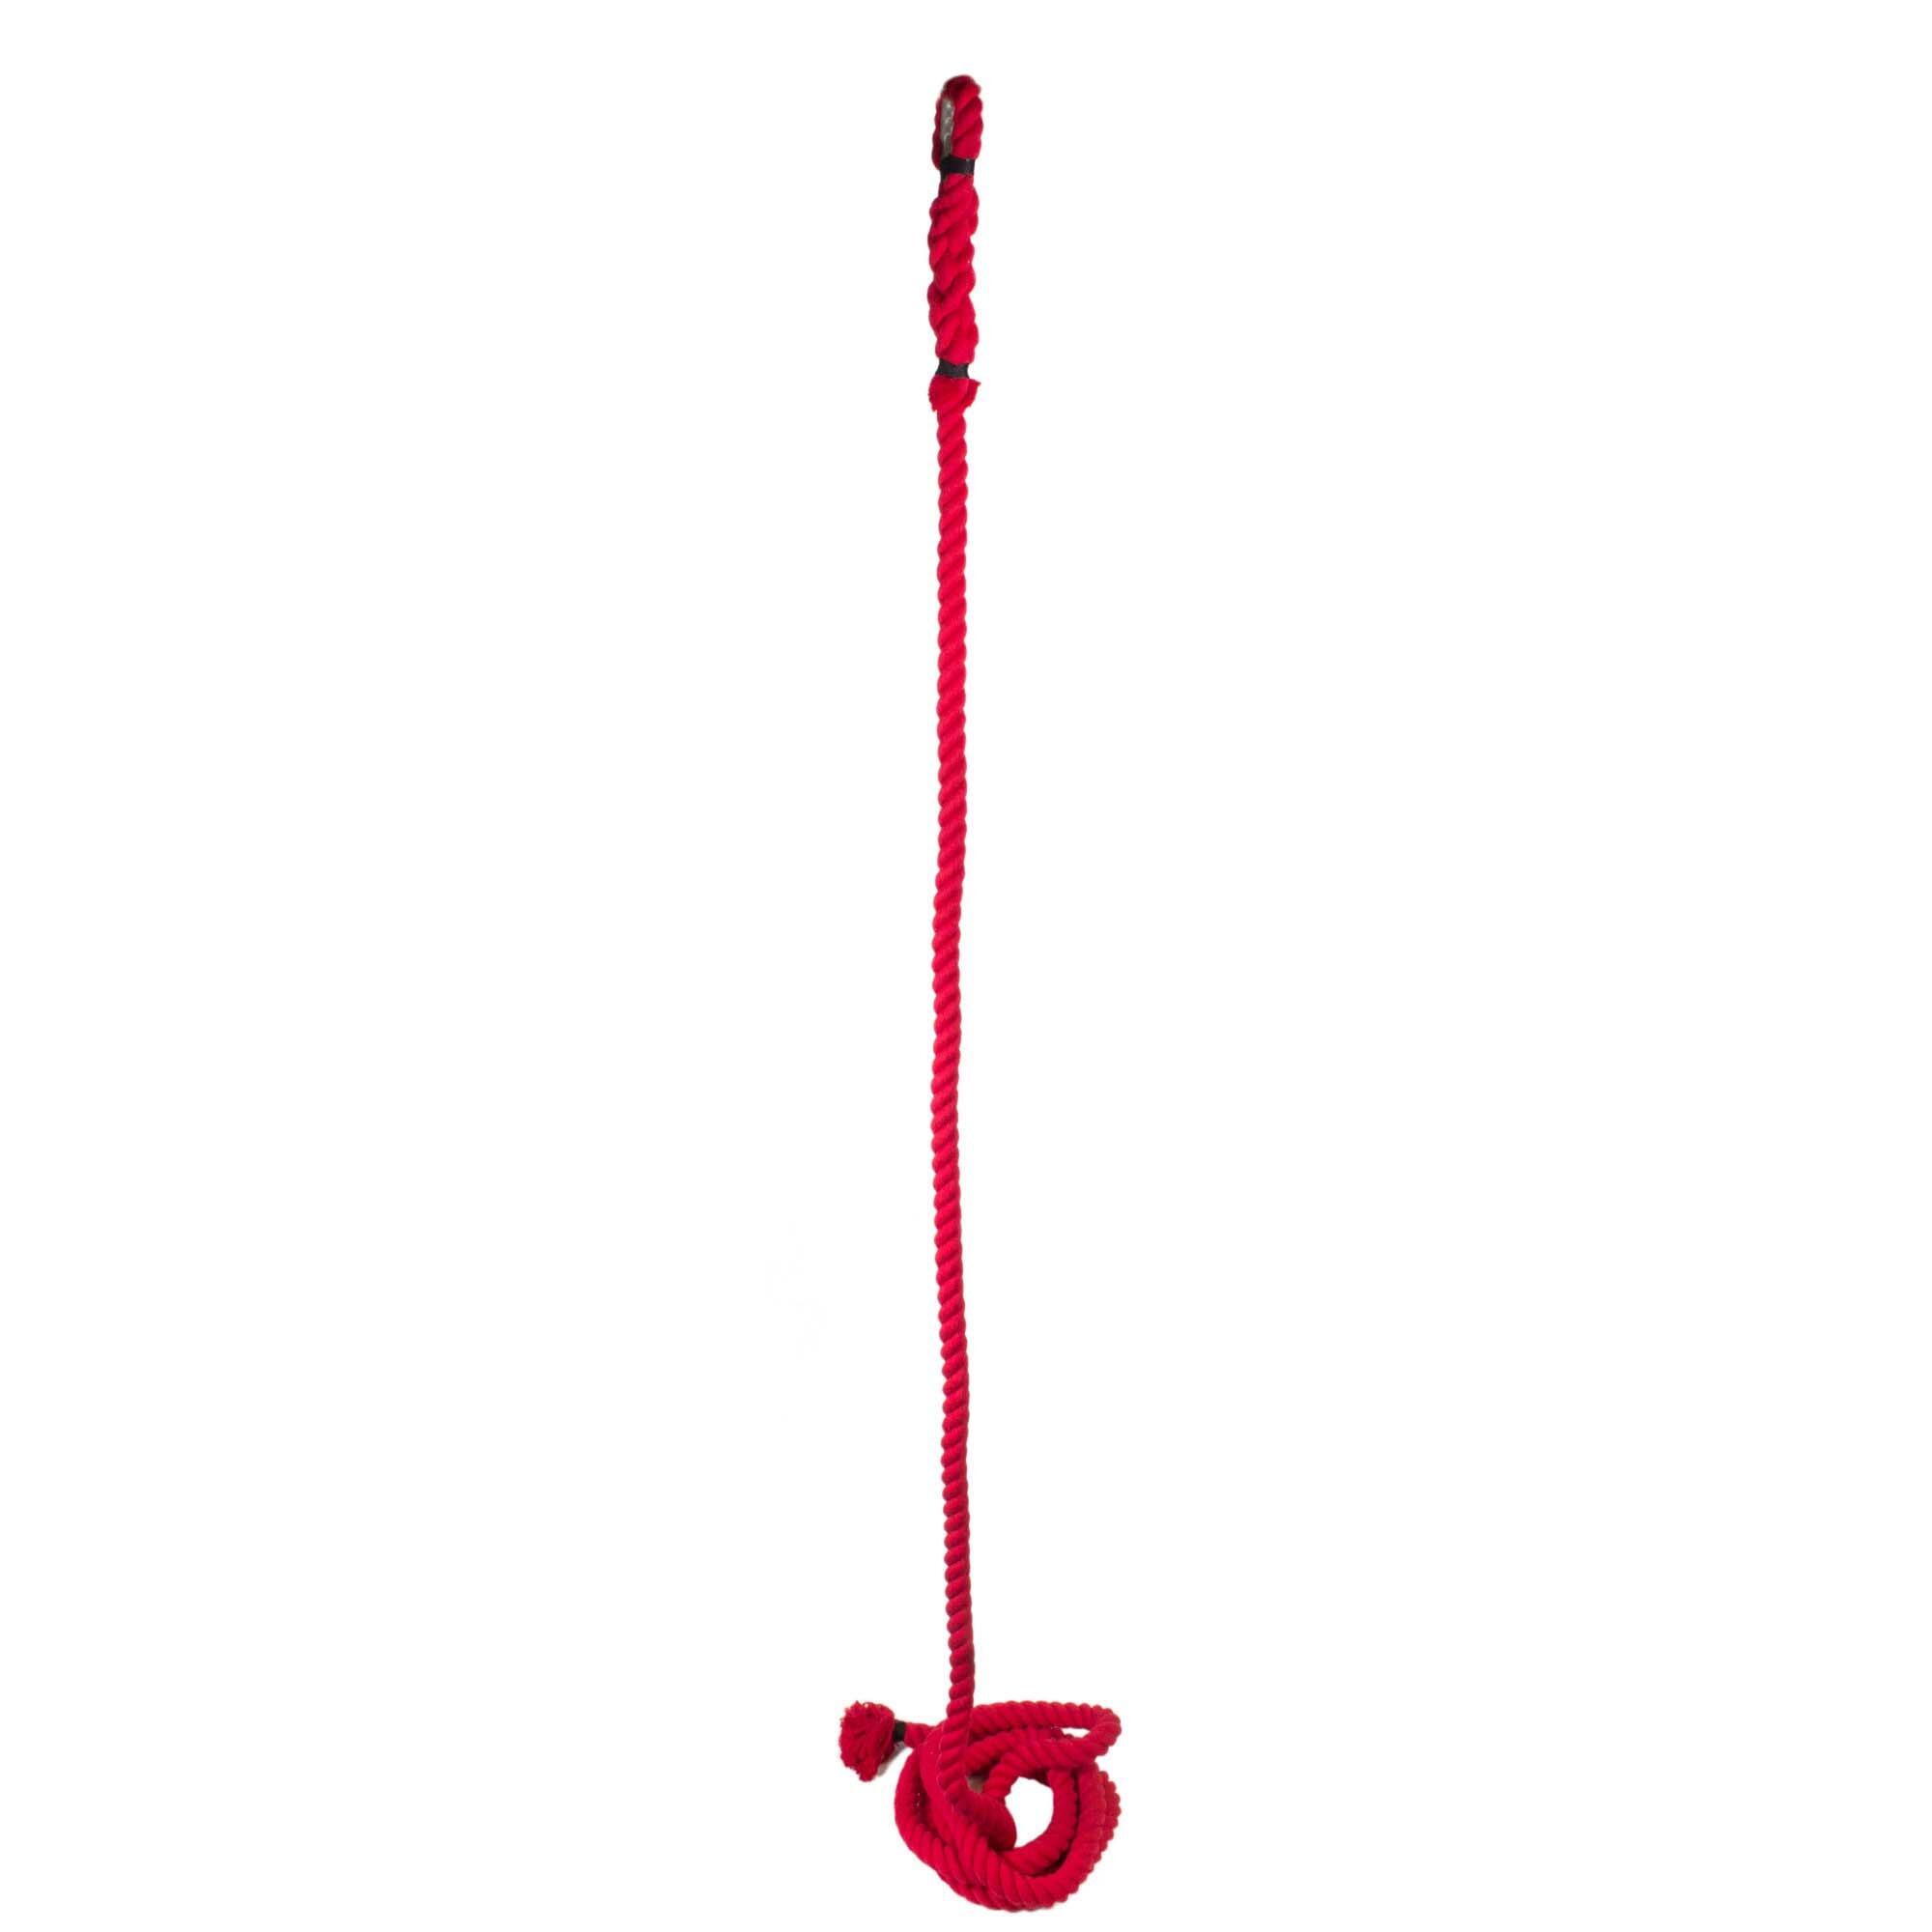 FIRETOYS Firetoys 3 Ply Red Free Rope (Corde Lisse) with Steel Eye